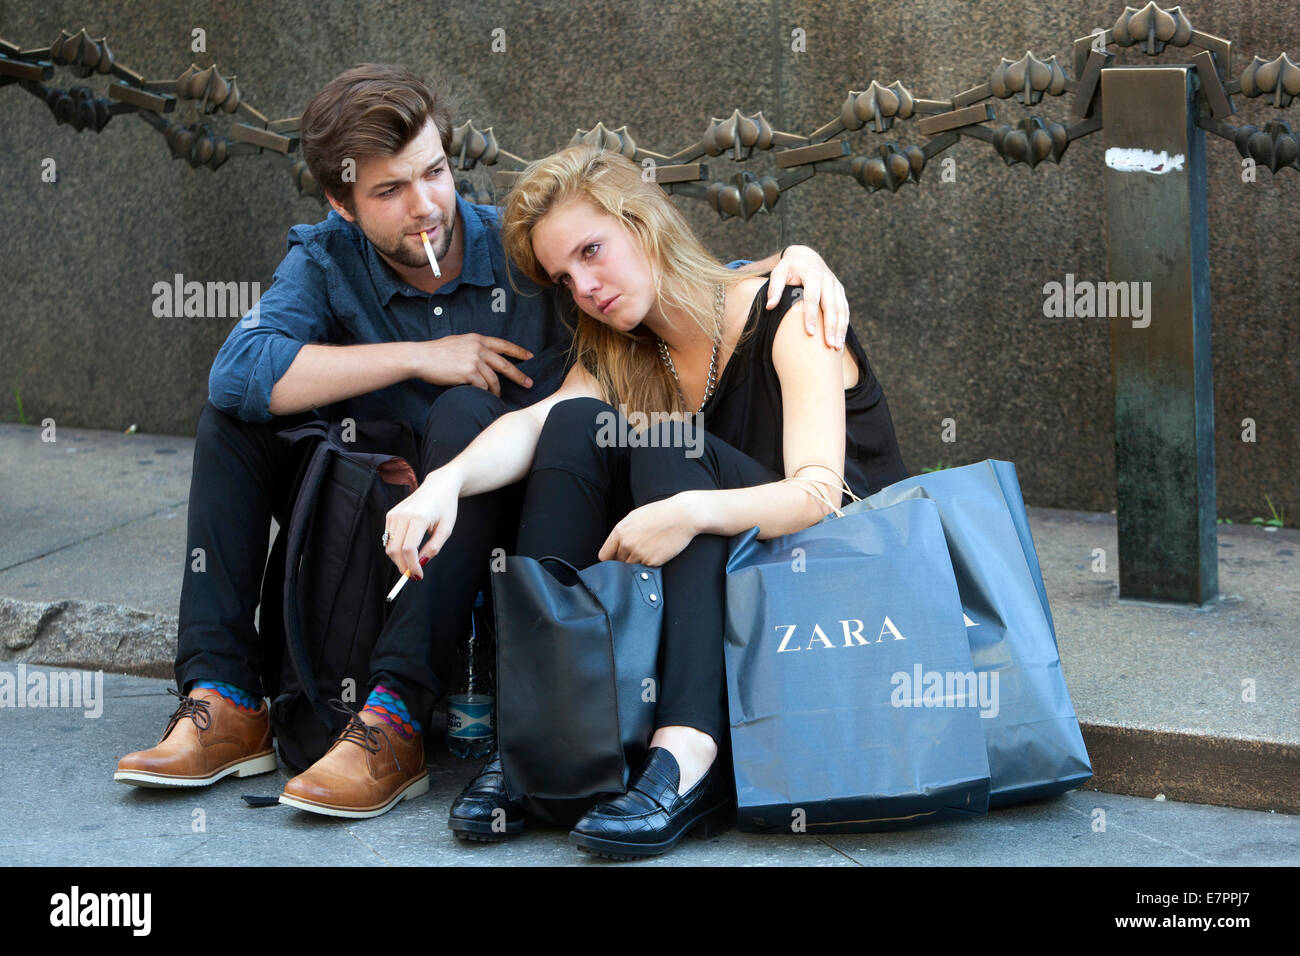 Prague shopping couple resting after shopping under monument of St. Wenceslas, Prague Czech Republic people Zara paper shopping bags young woman sad Stock Photo